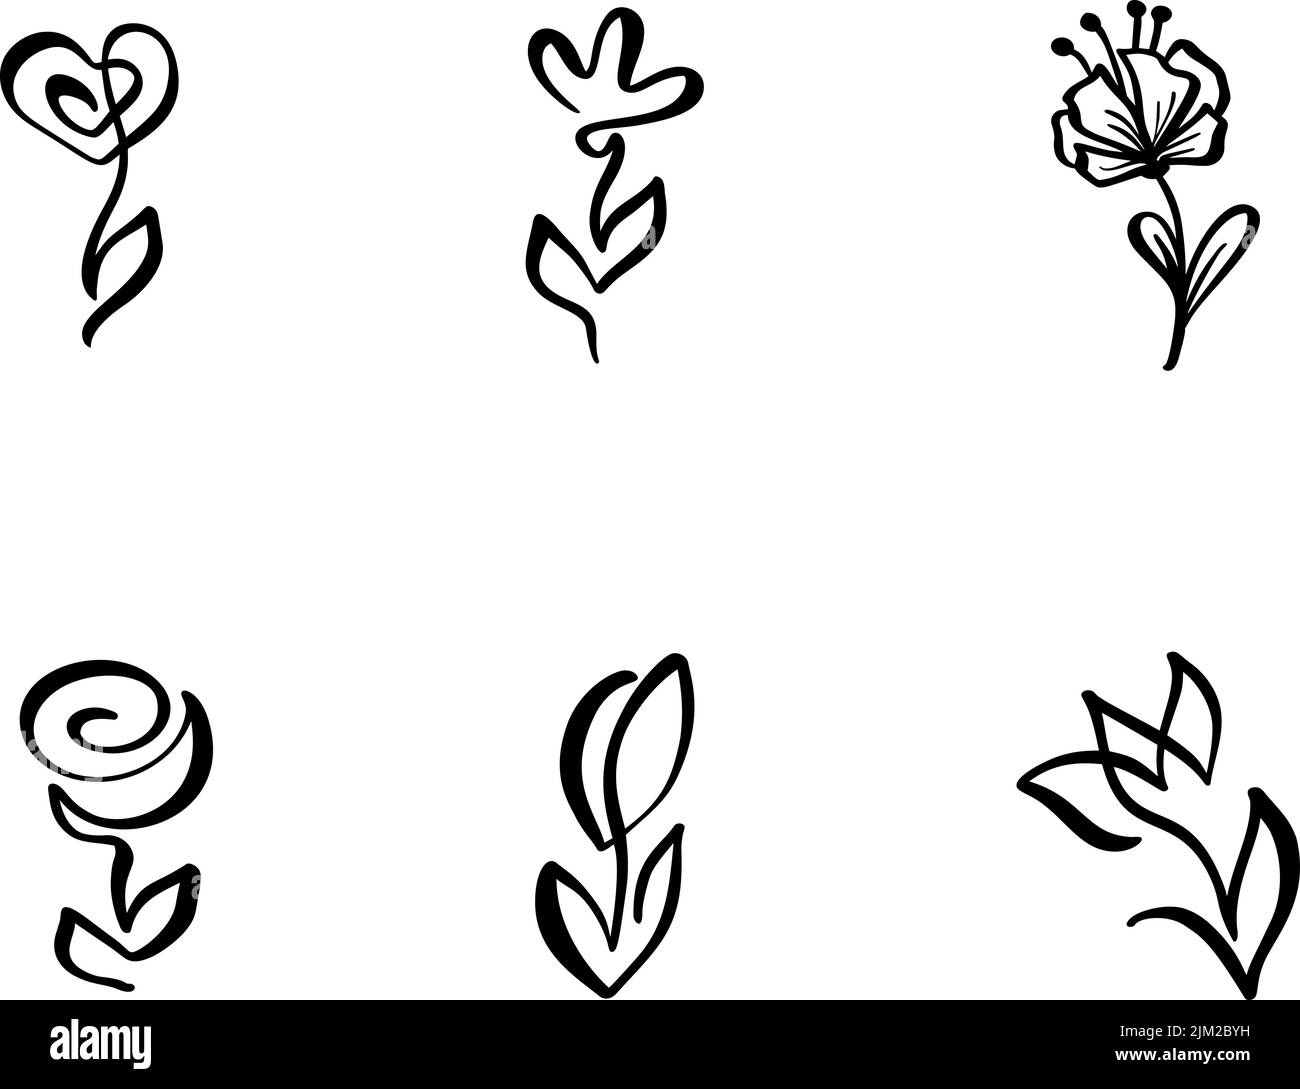 Set of Continuous Line art Drawing Vector Calligraphic Flower logo. Black Sketch icon of Plants Isolated on White Background. One Line Illustration Stock Vector